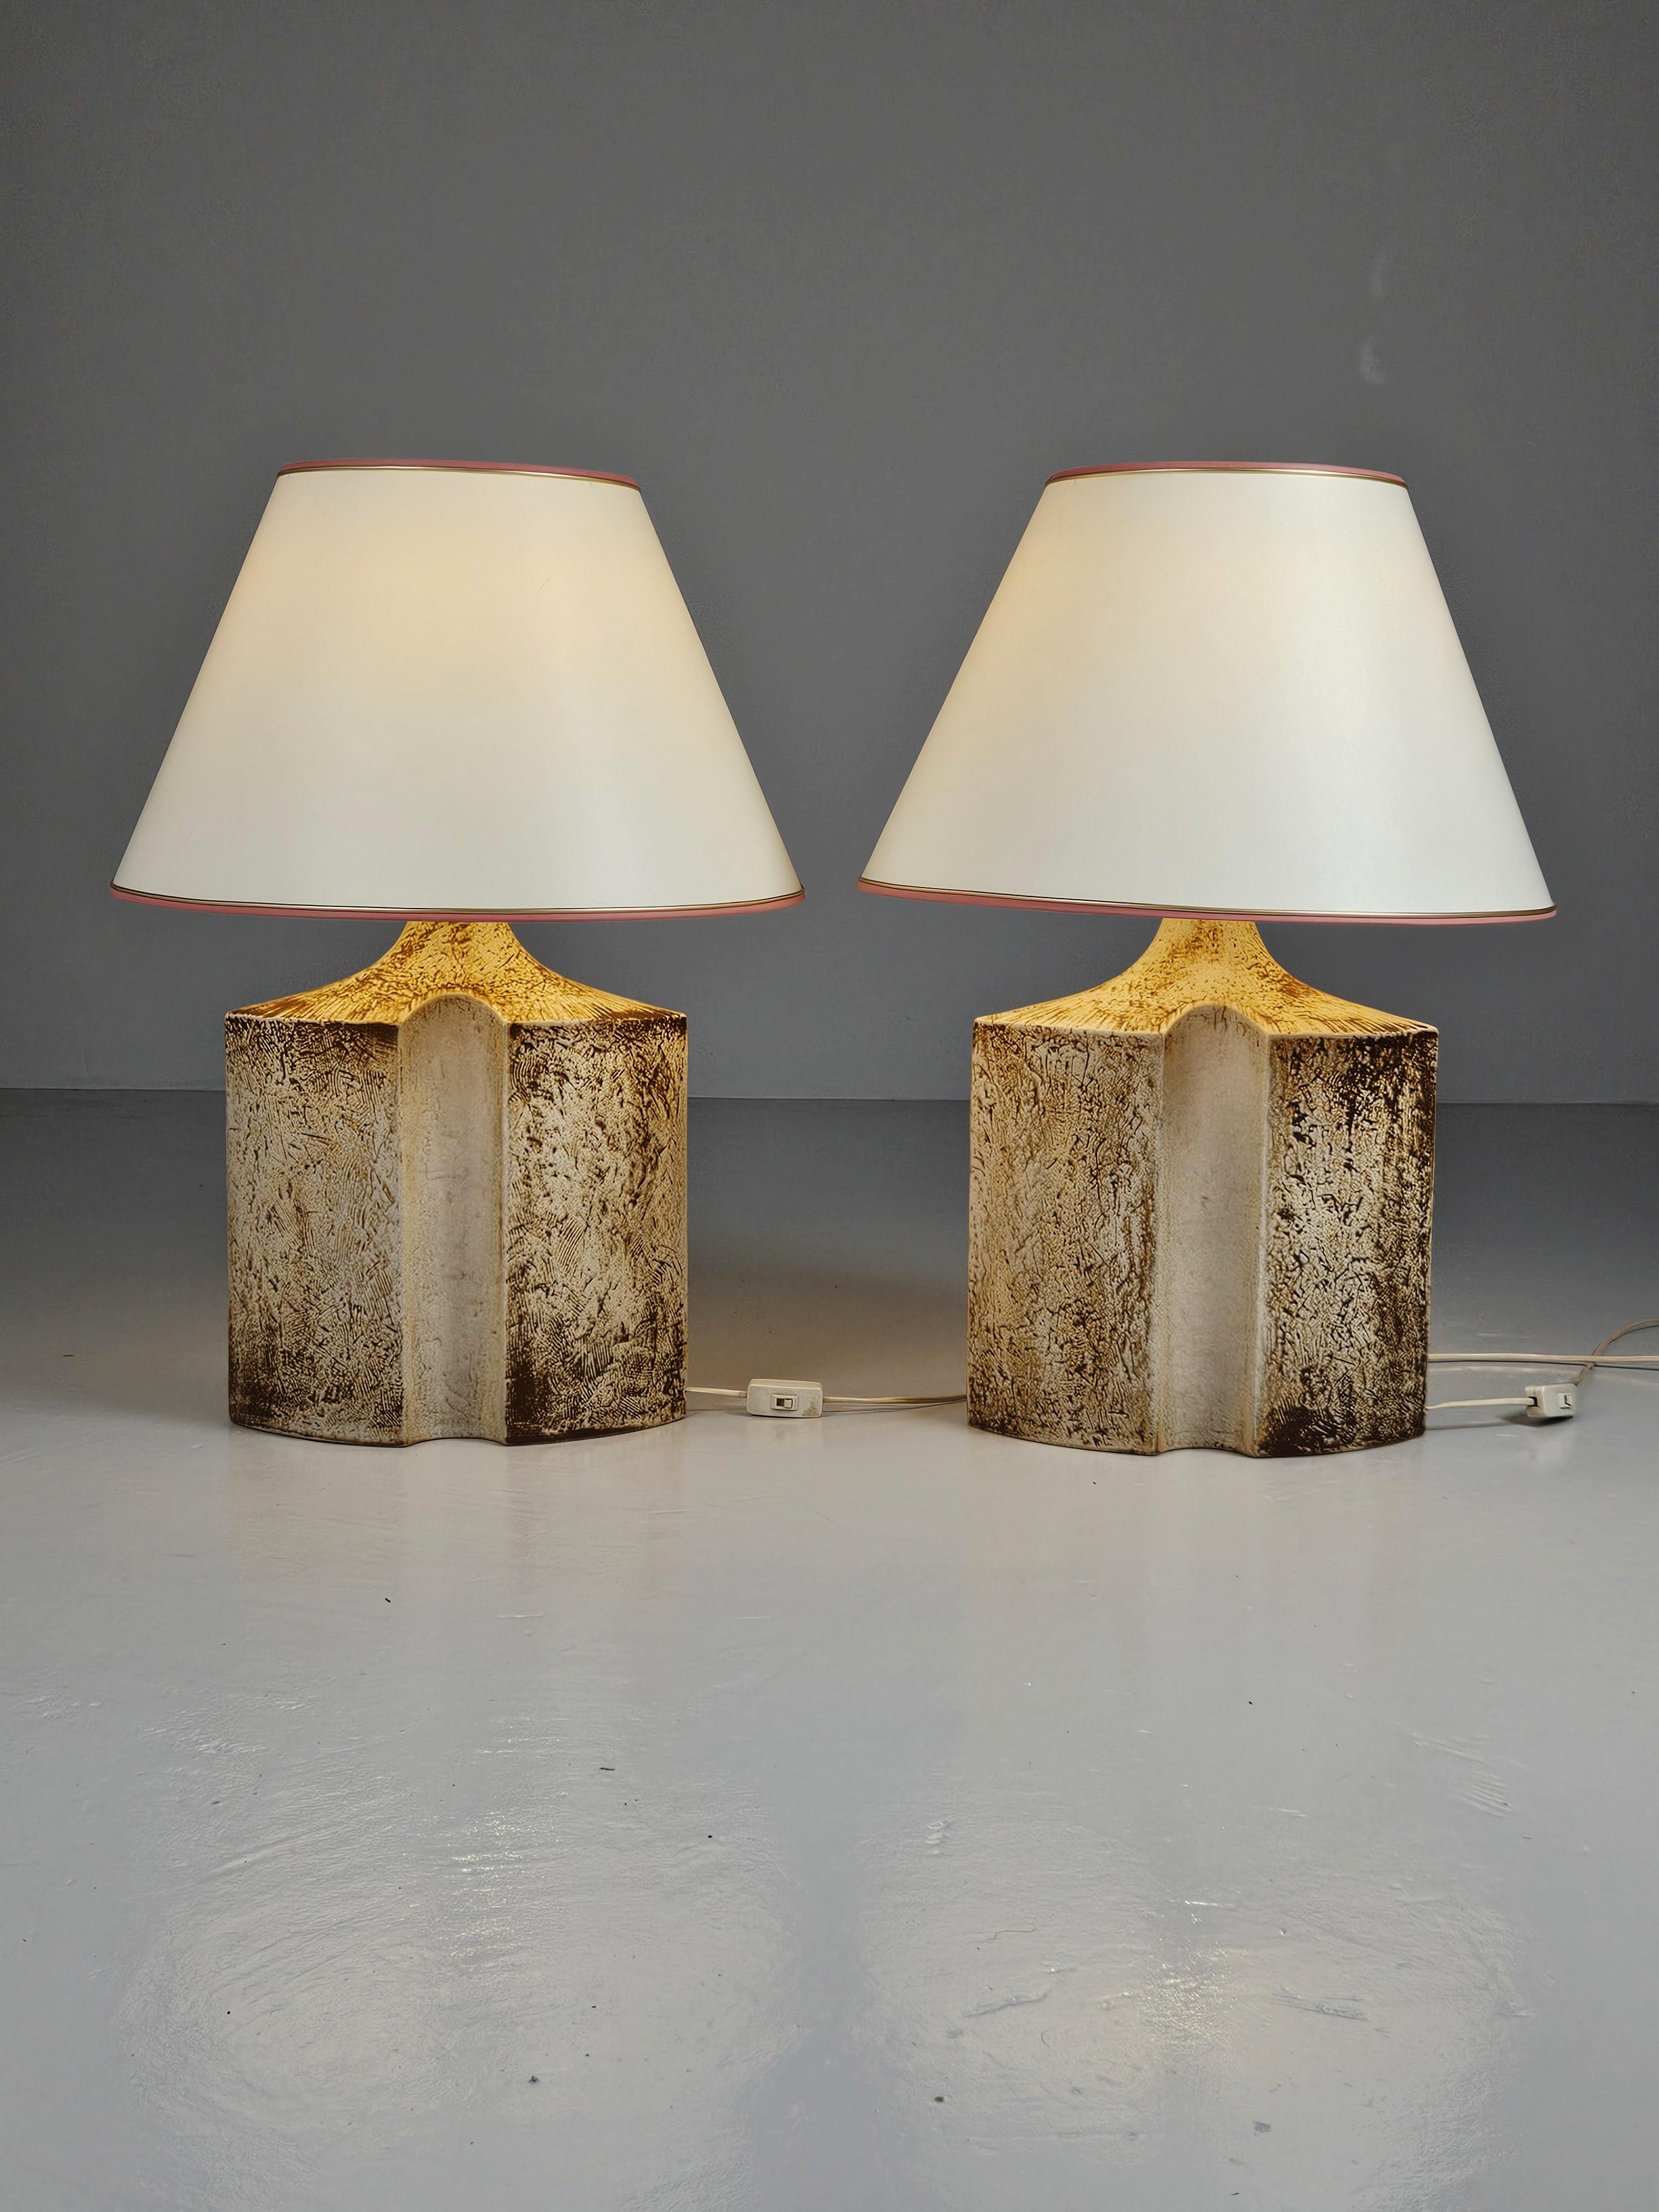 Great table lamps designed by Haico Nitzsche and produced by Søholm Stentøj, Denmark, during the 1960s. 

Impressive size with rustic earth tone glaze. 